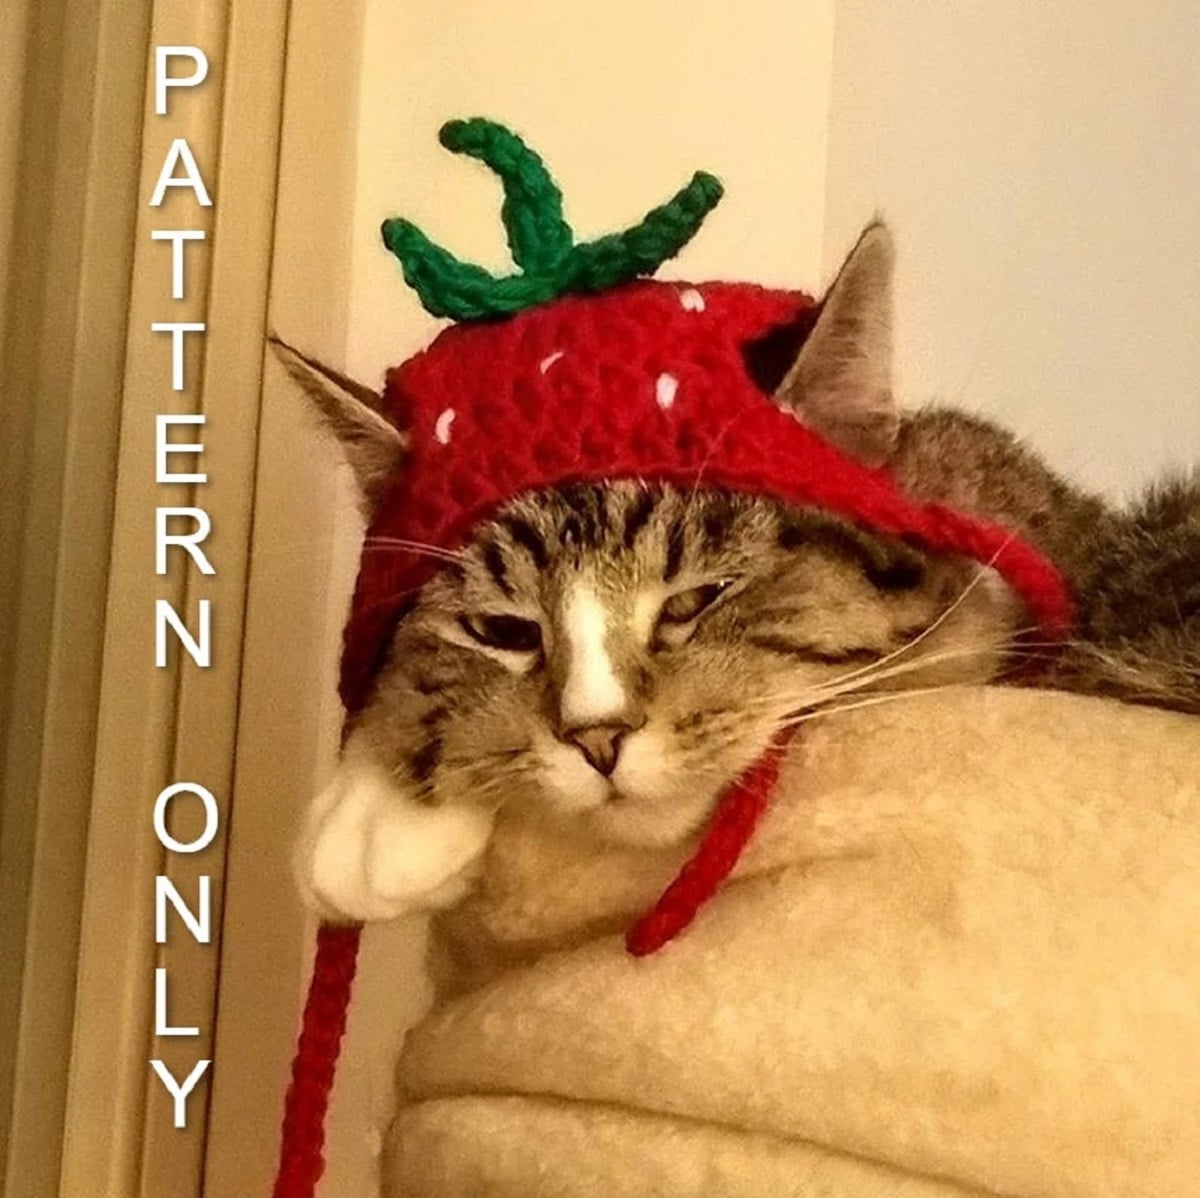 A large tabby cat lying down wearing a crochet strawberry style hat with holes for its ears and a green stem on top.